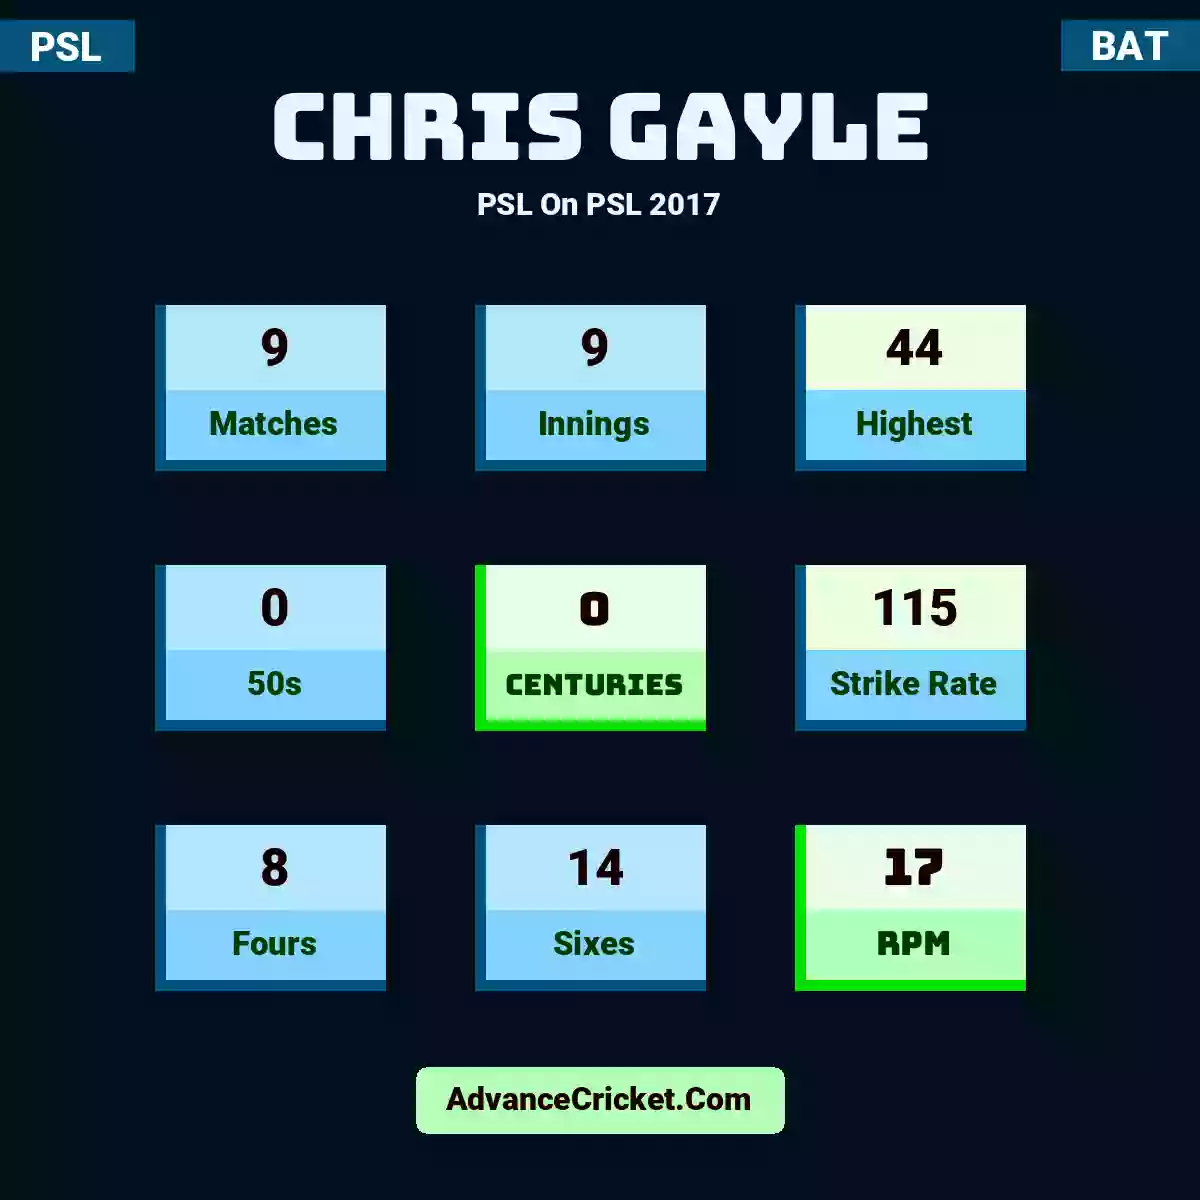 Chris Gayle PSL  On PSL 2017, Chris Gayle played 9 matches, scored 44 runs as highest, 0 half-centuries, and 0 centuries, with a strike rate of 115. C.Gayle hit 8 fours and 14 sixes, with an RPM of 17.